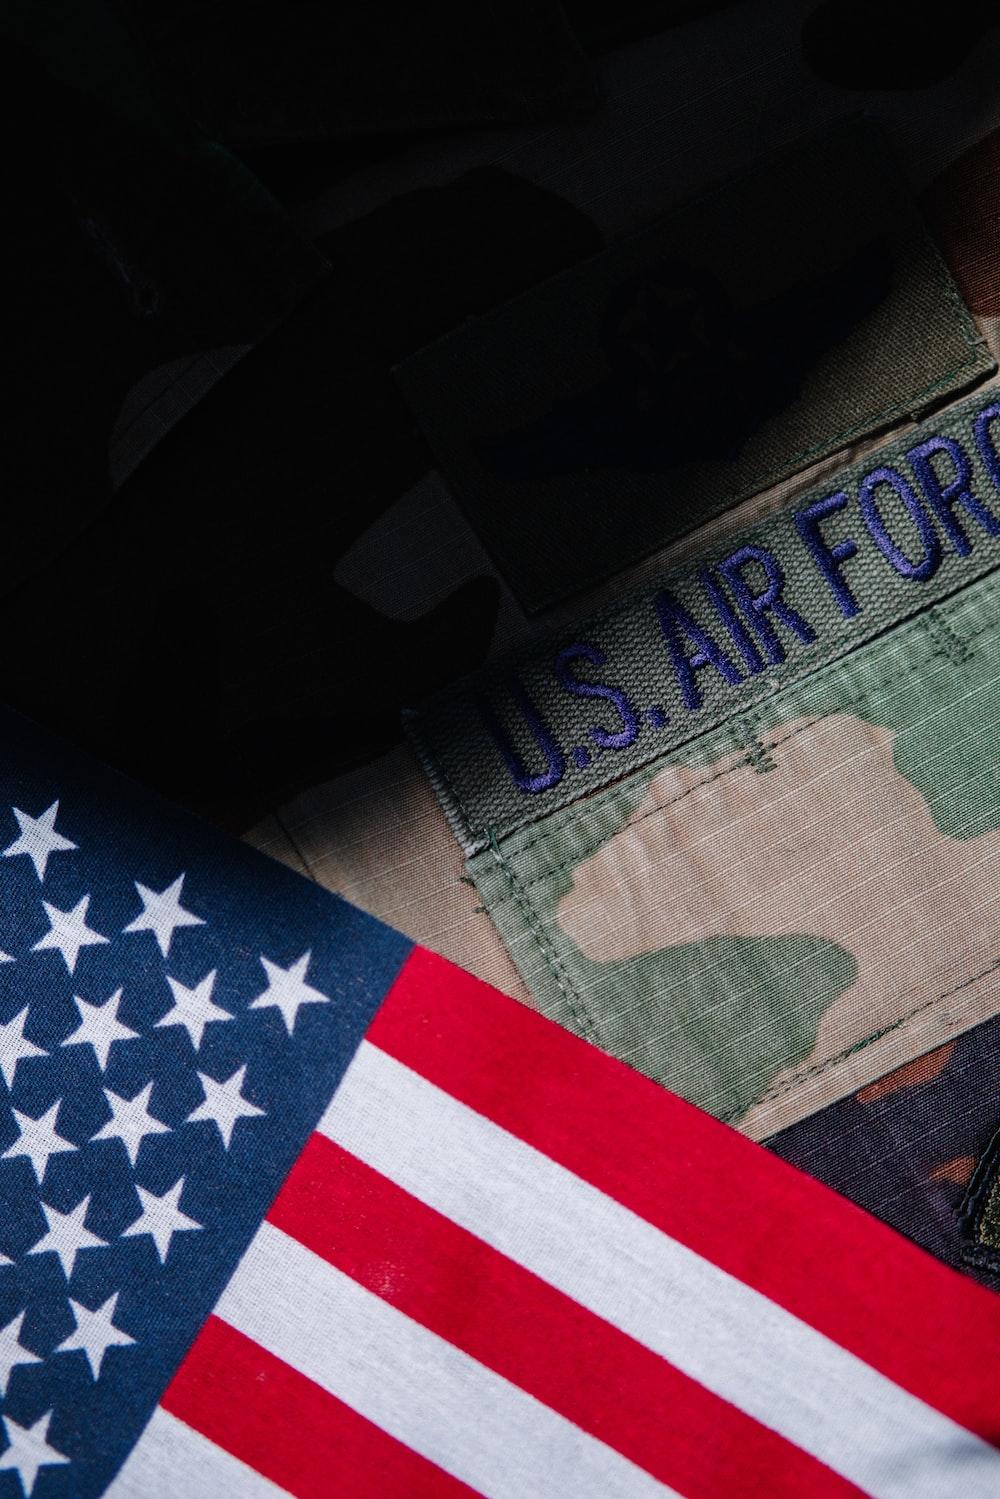 A Close Up Of Us Army Uniform And An American Flag Photo